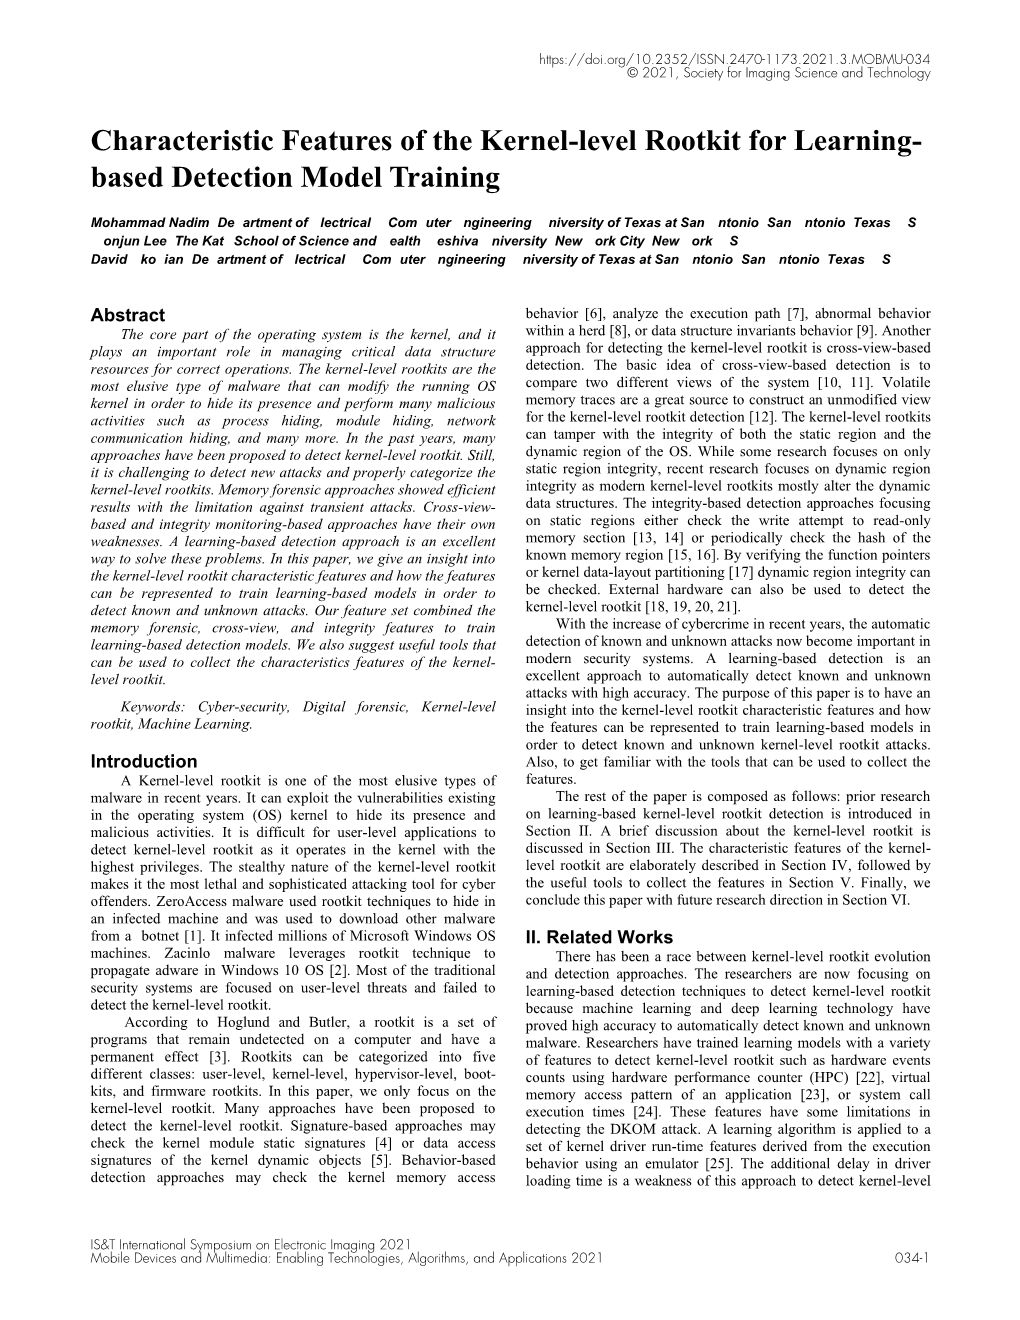 Characteristic Features of the Kernel-Level Rootkit for Learning-Based Detection Model Training